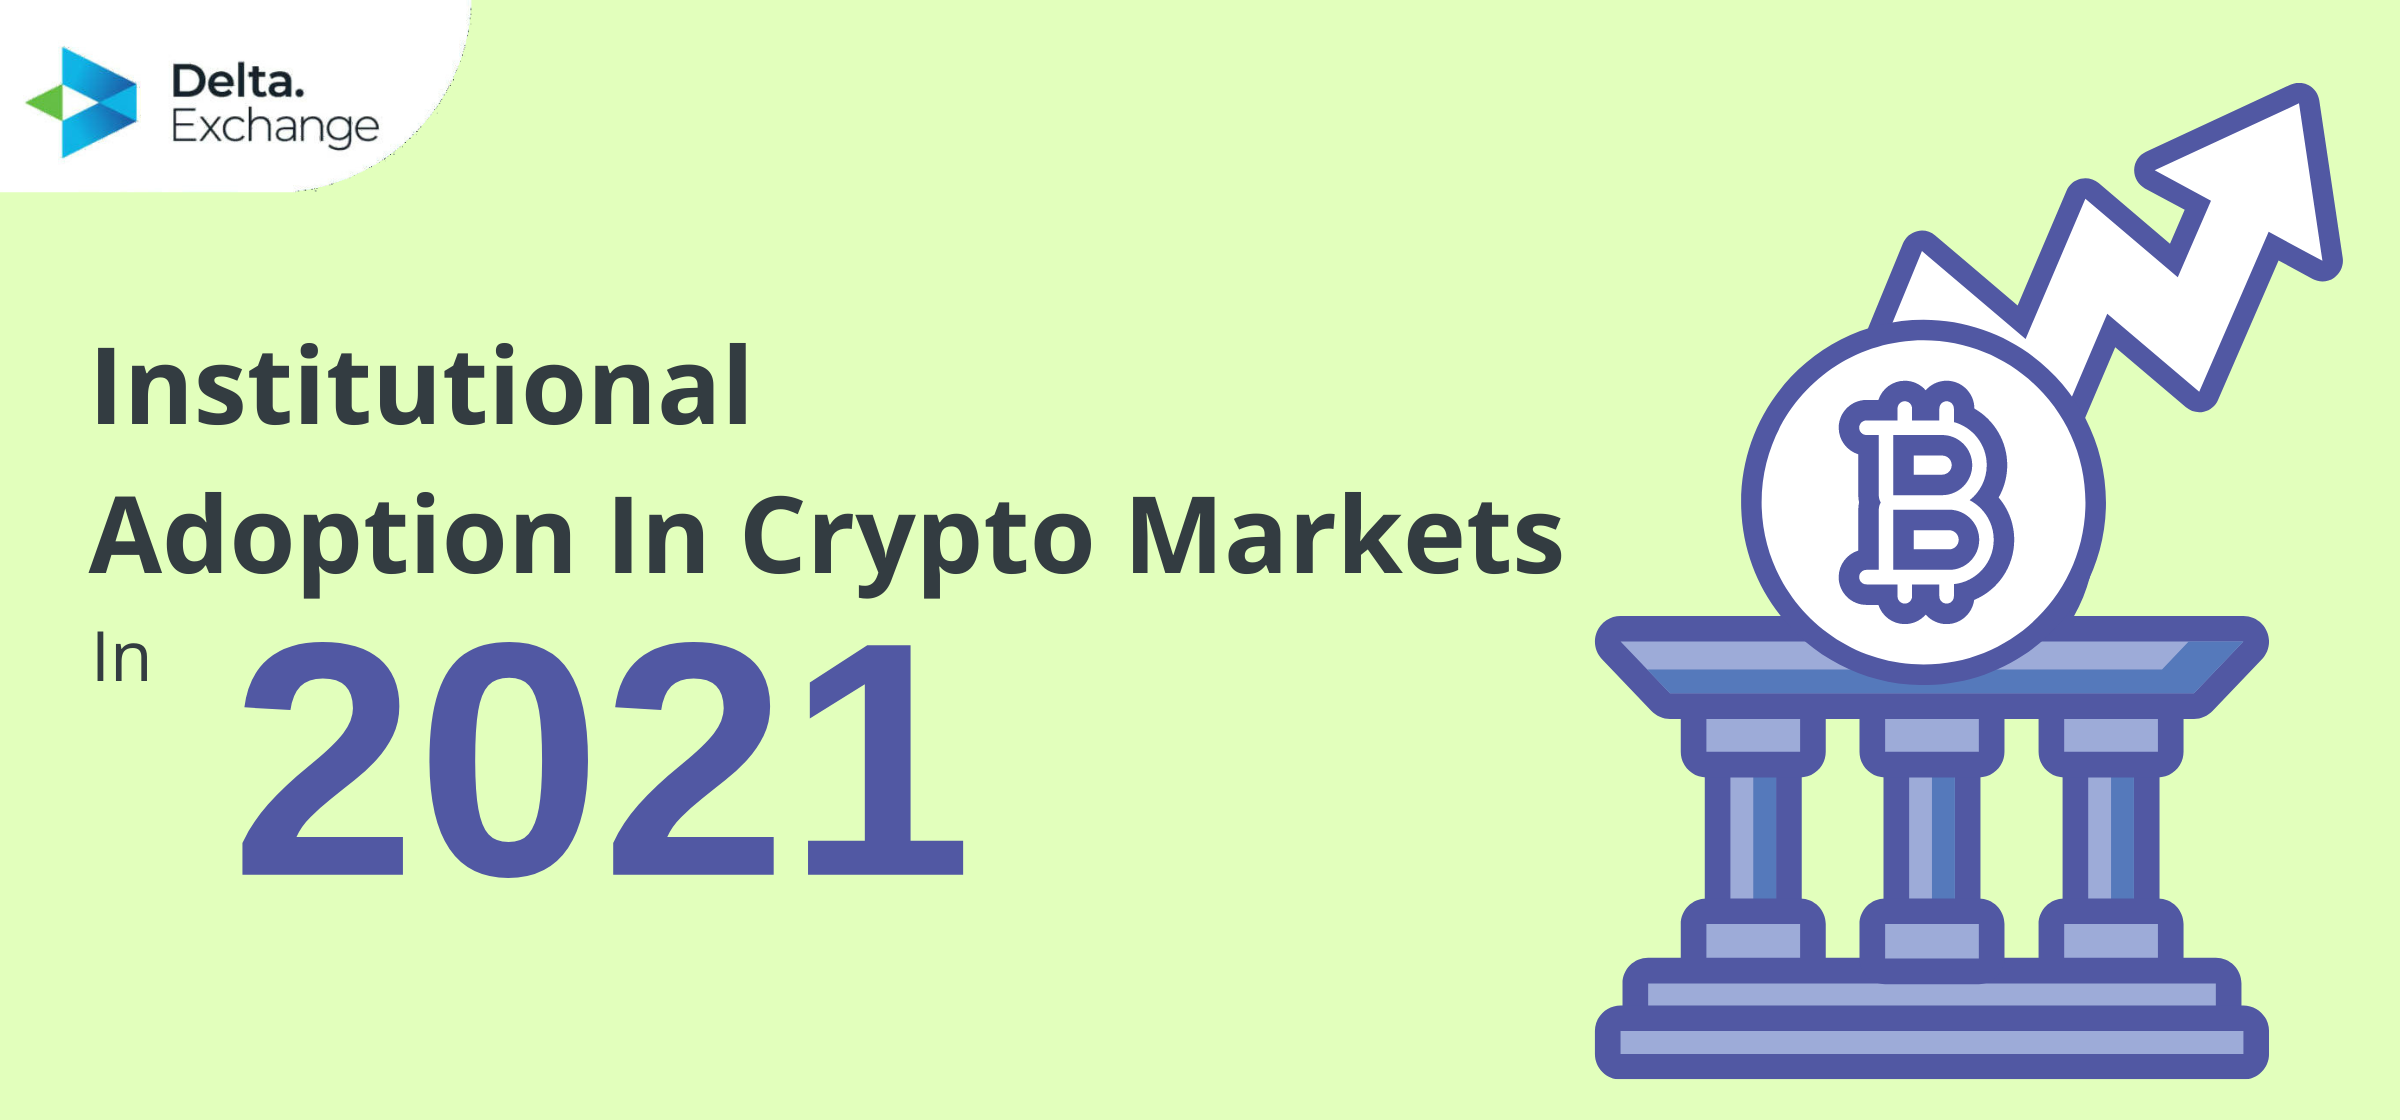 Impact of Institutional Adoption On Crypto Market in 2021